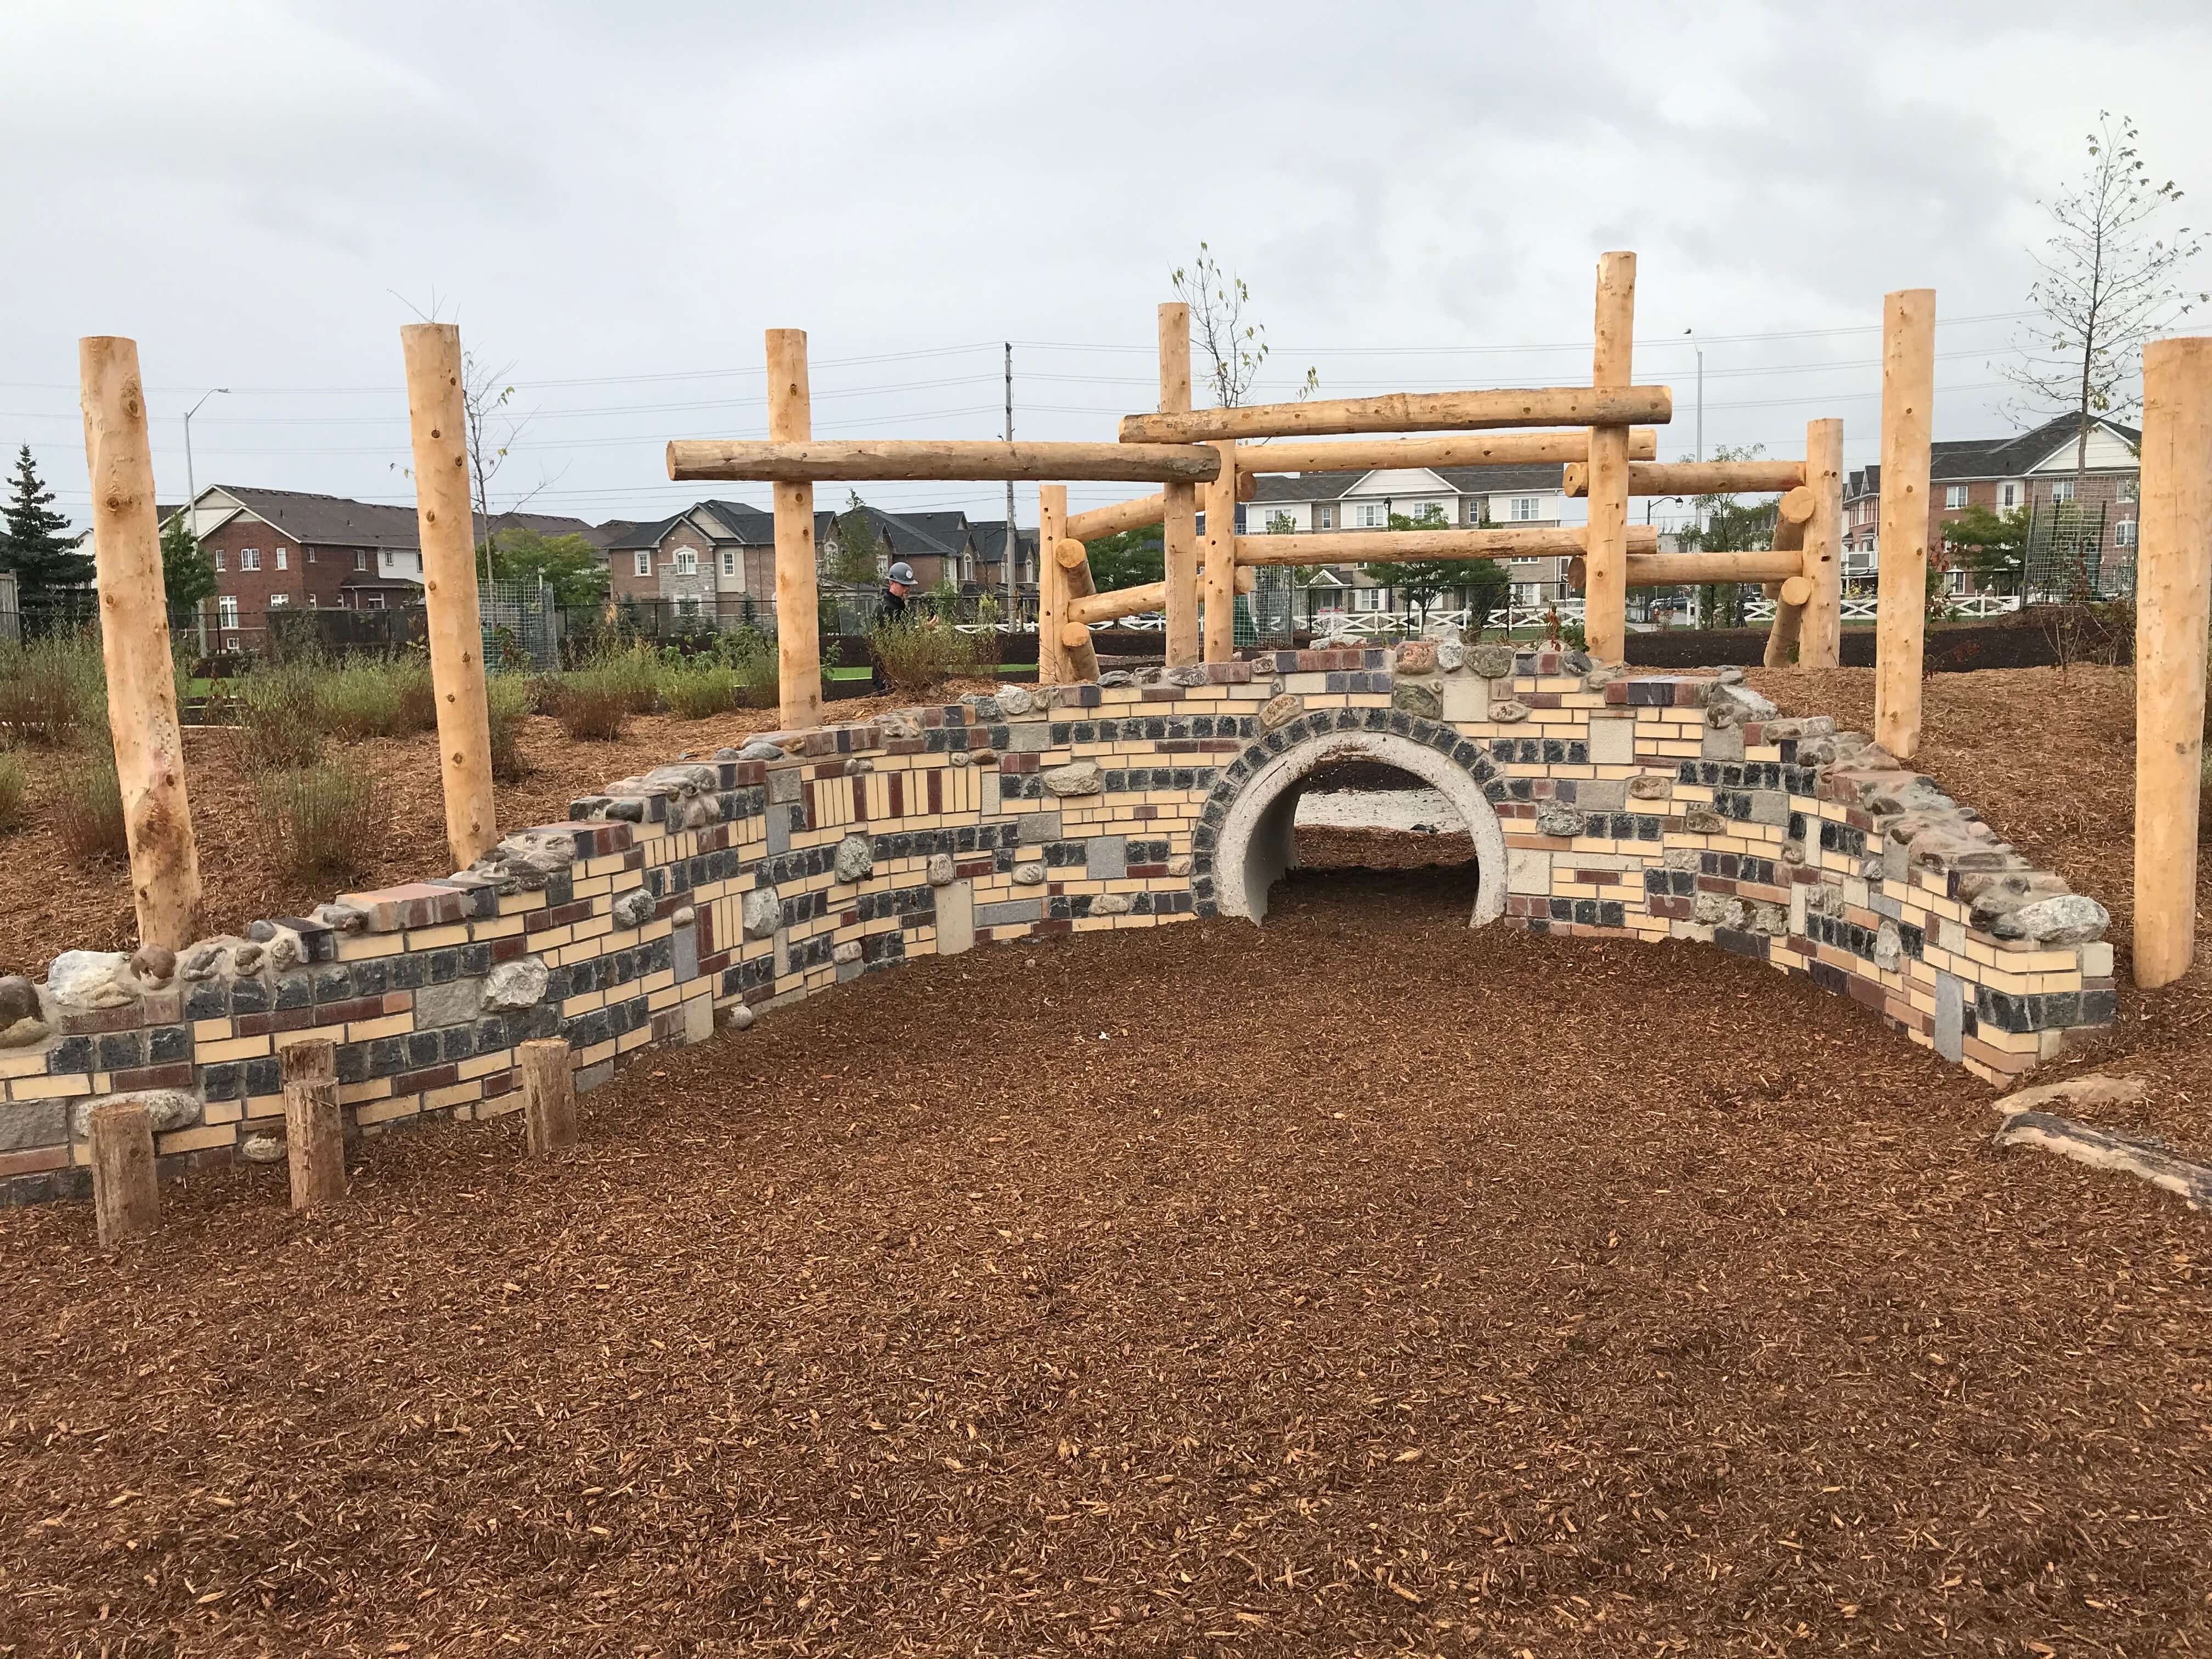 Tunnel feature in playground at irma coulson public school